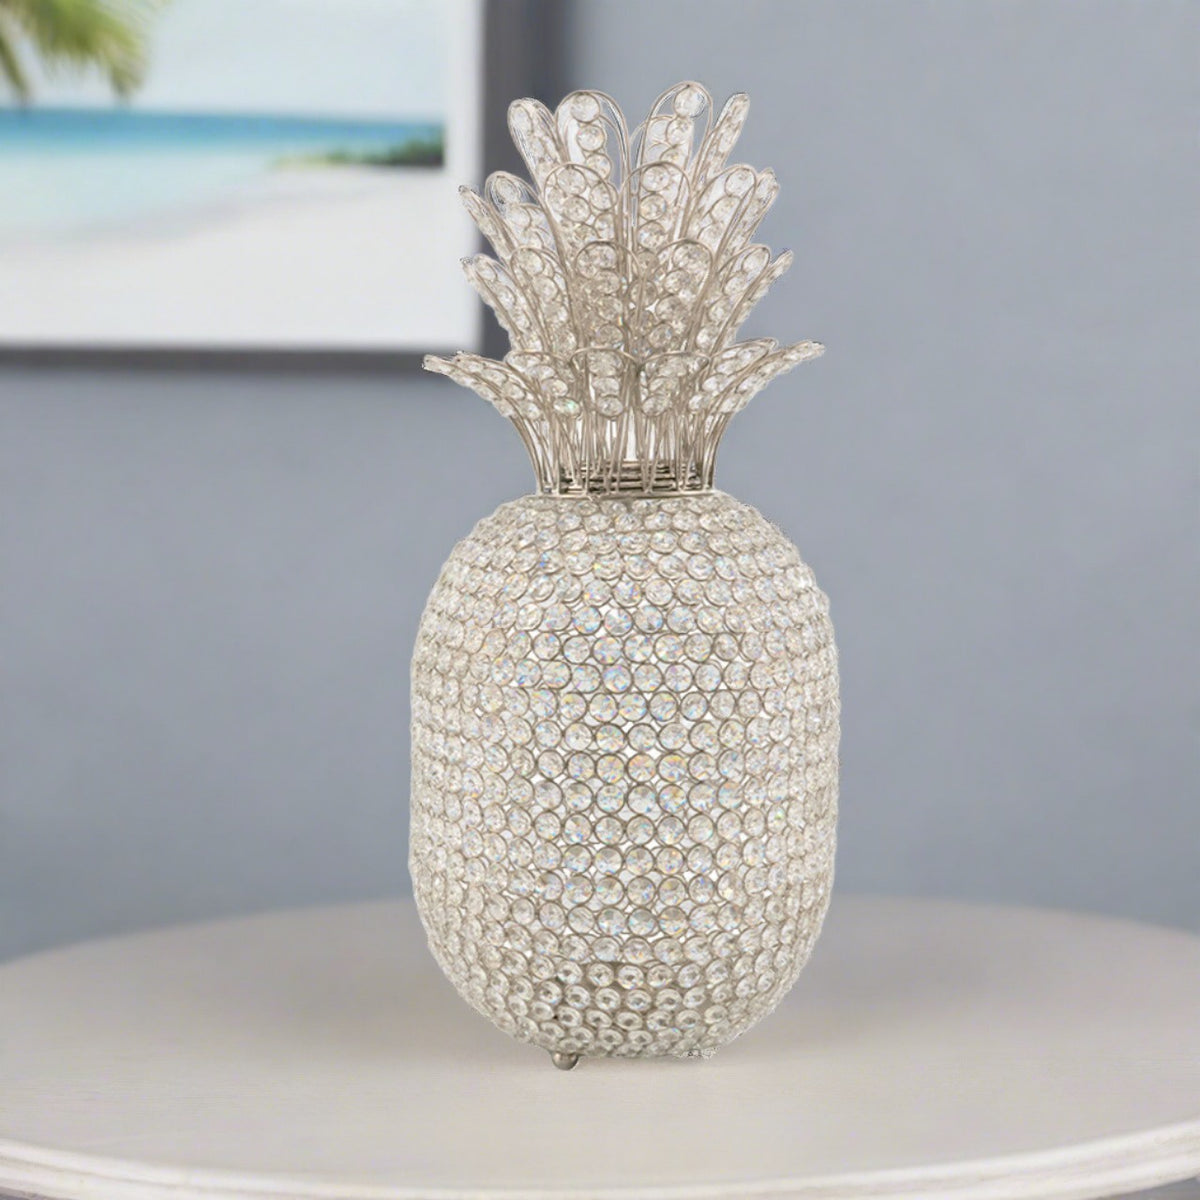 Pina Large Crystal Pineapple Decor, Gold or Silver